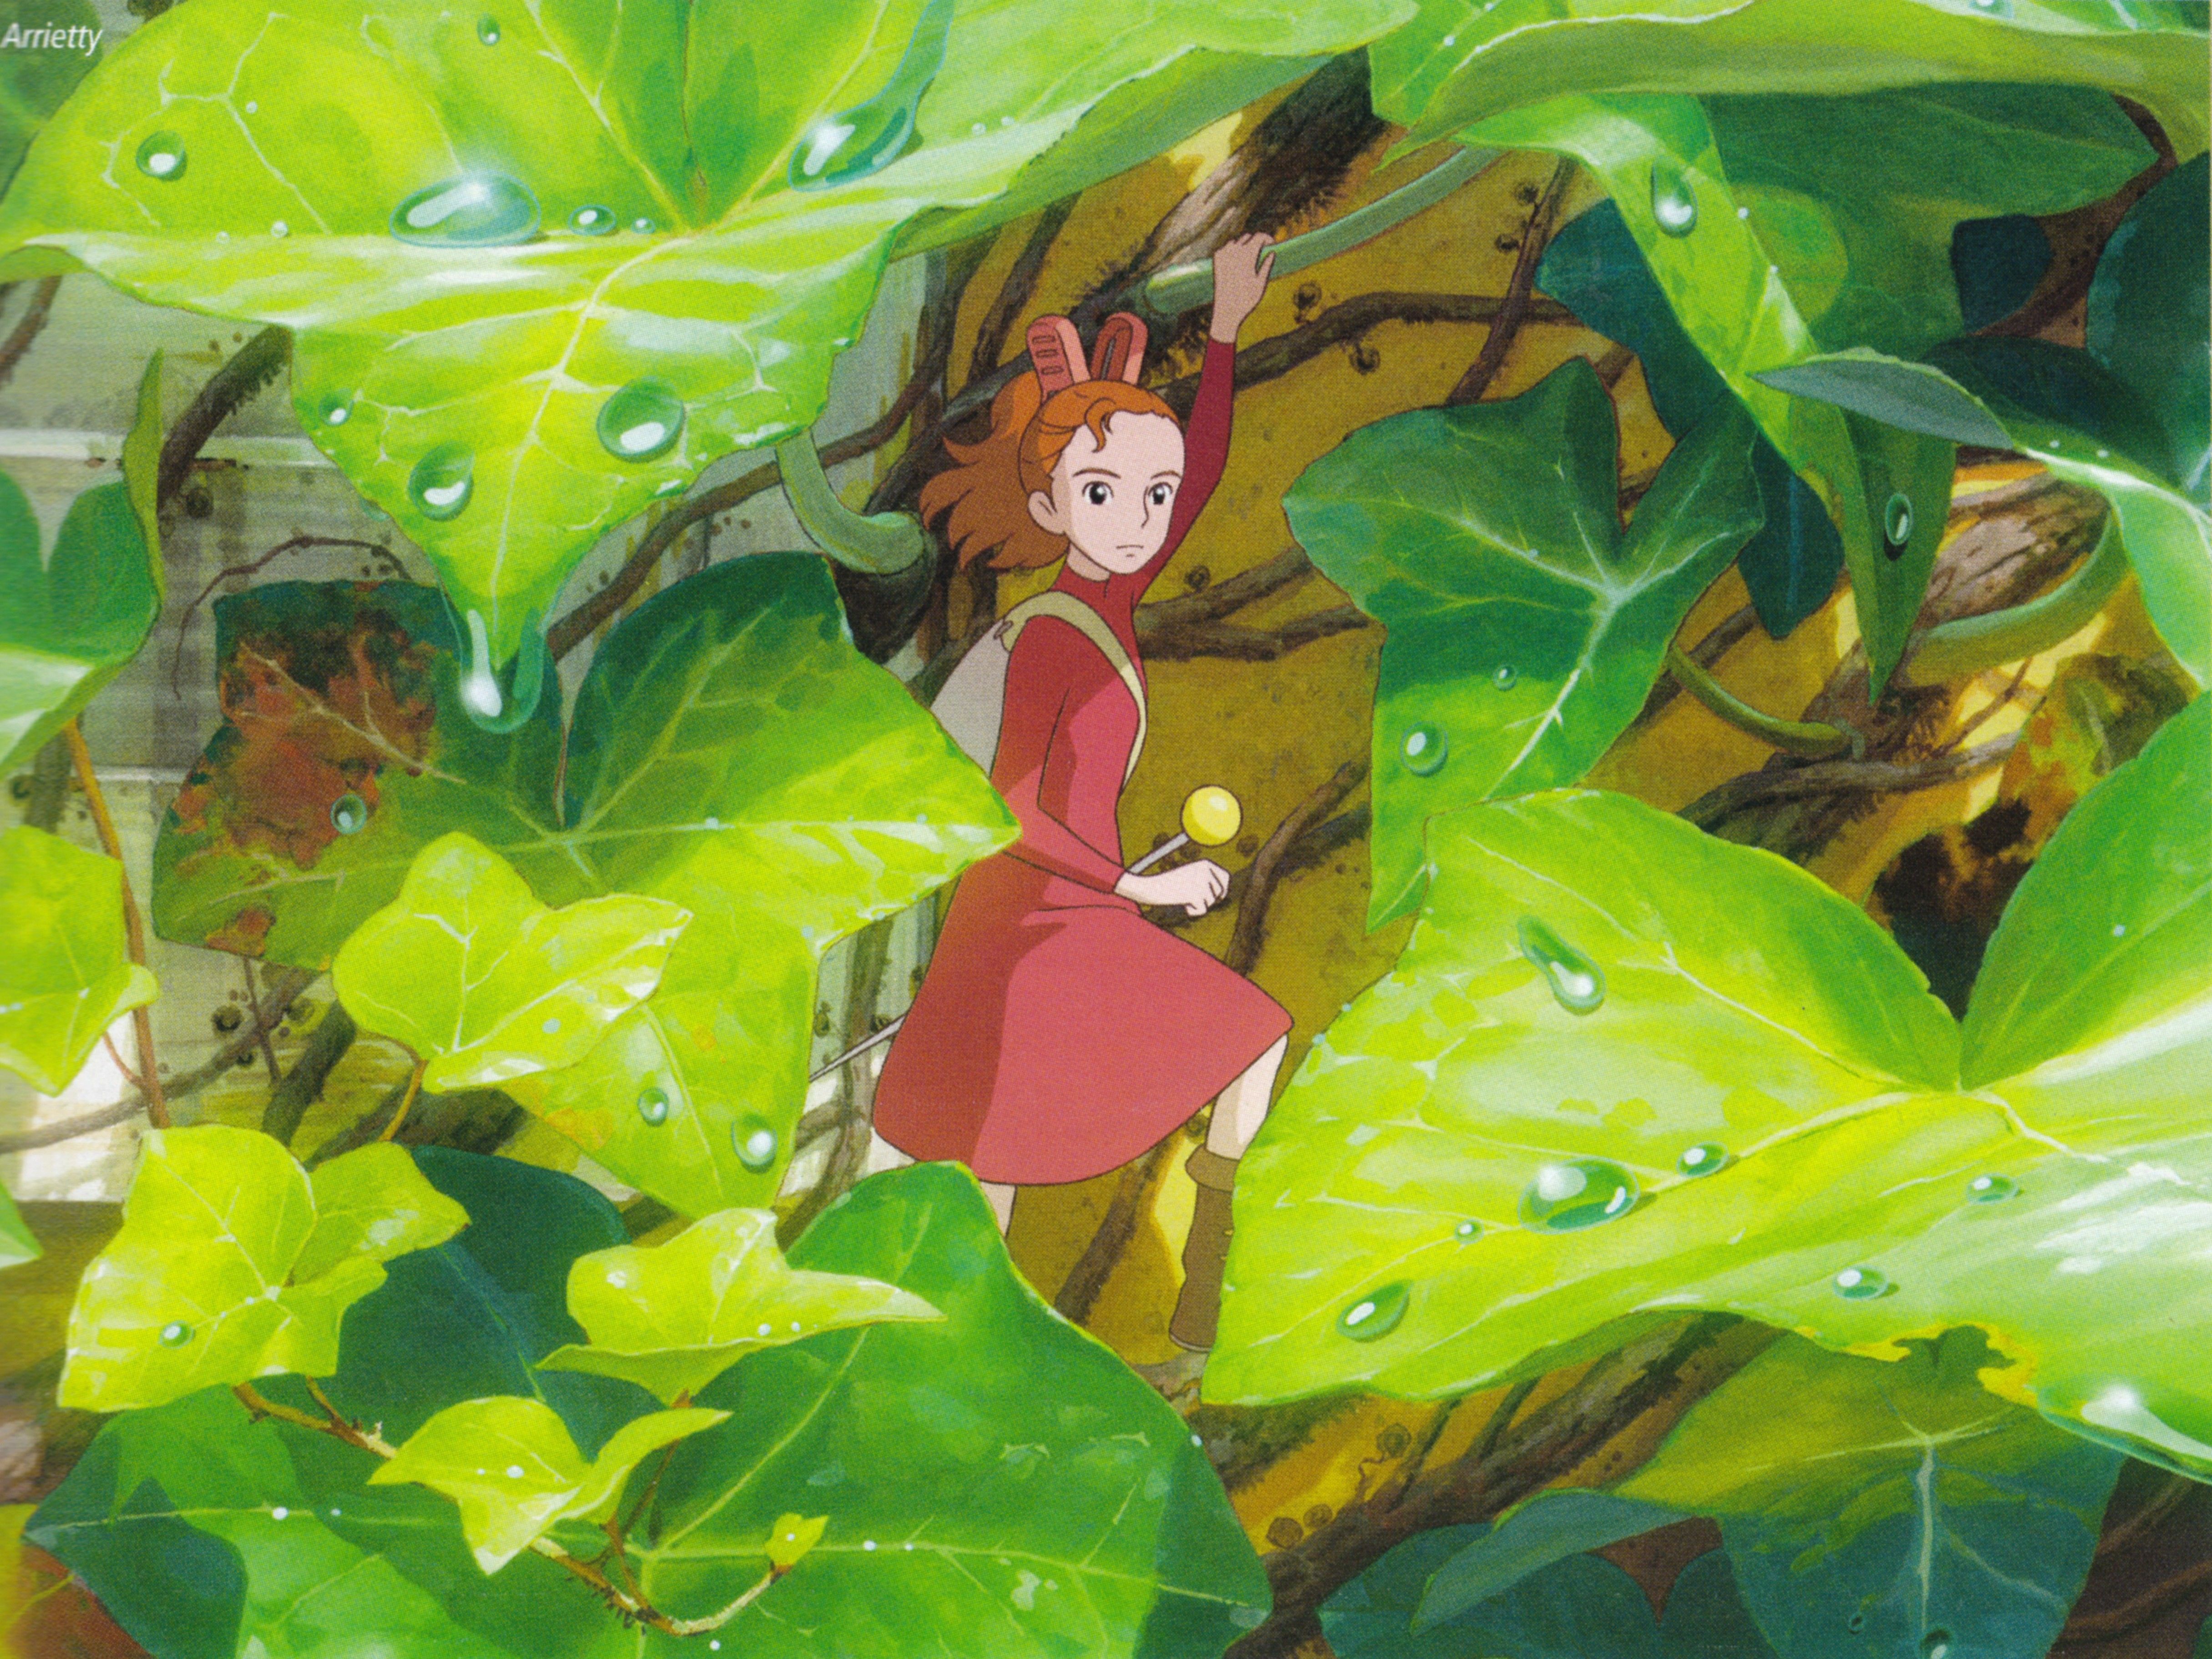 The Borrower Arrietty and Scan Gallery